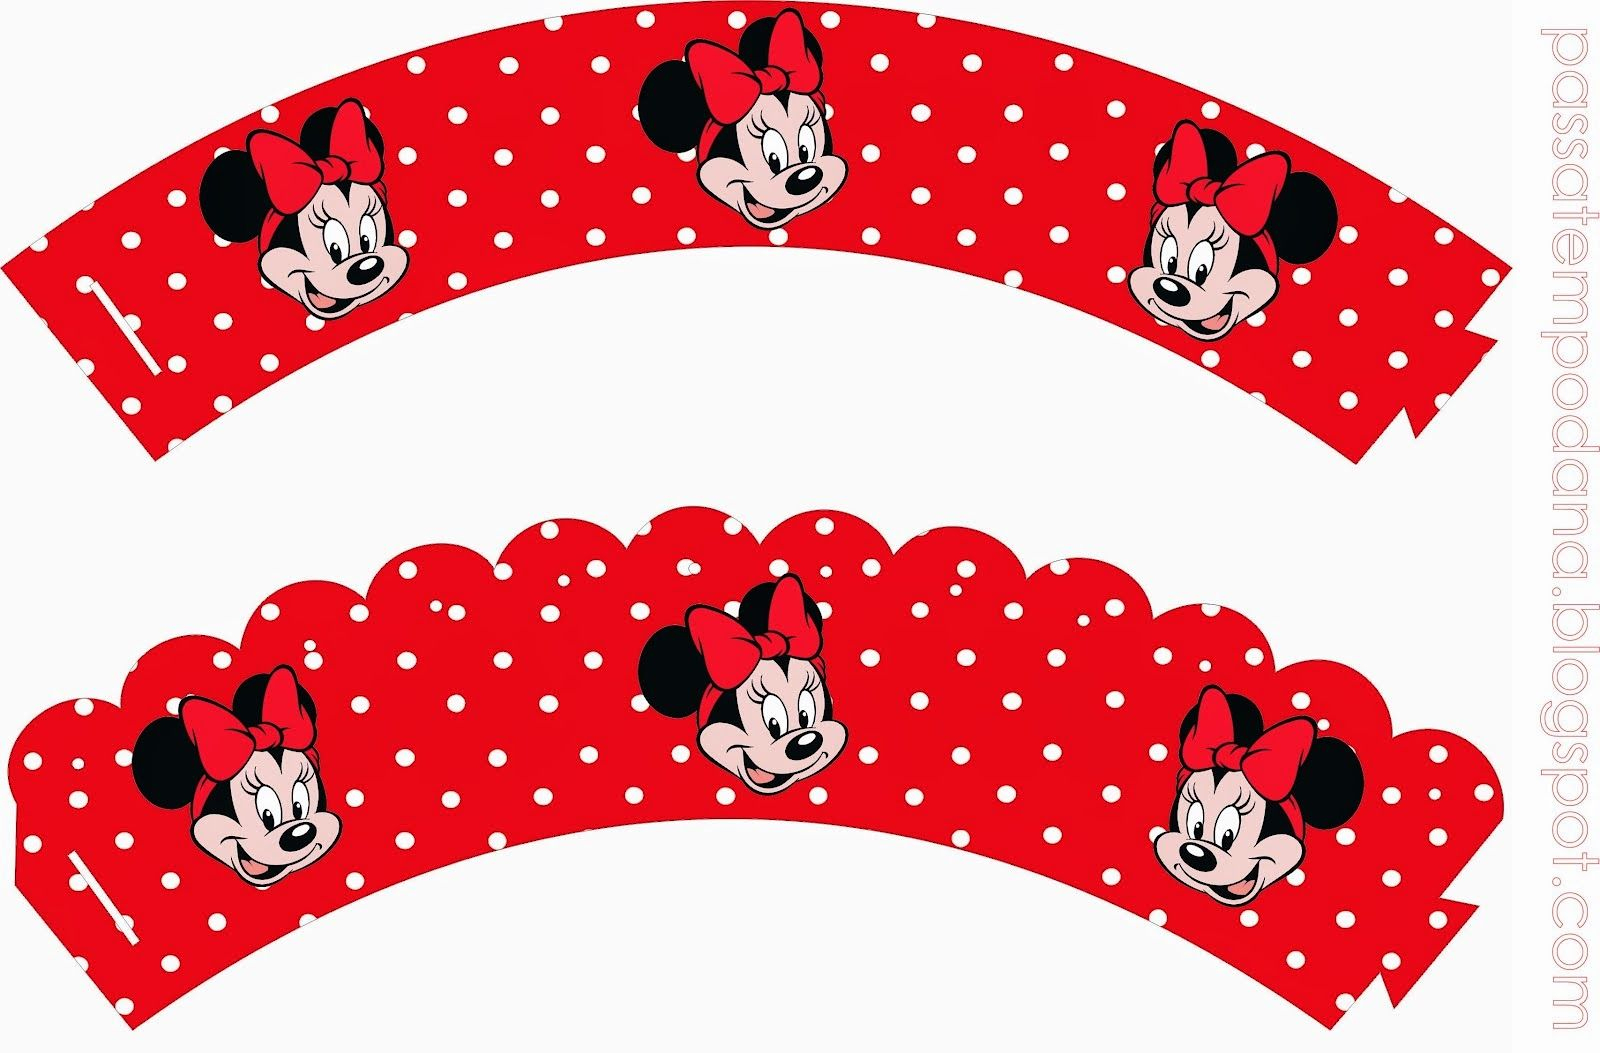 Free Printable Cupcake Wrappers. | Fiesta Minnie Mouse | Pinterest - Free Printable Minnie Mouse Cupcake Wrappers